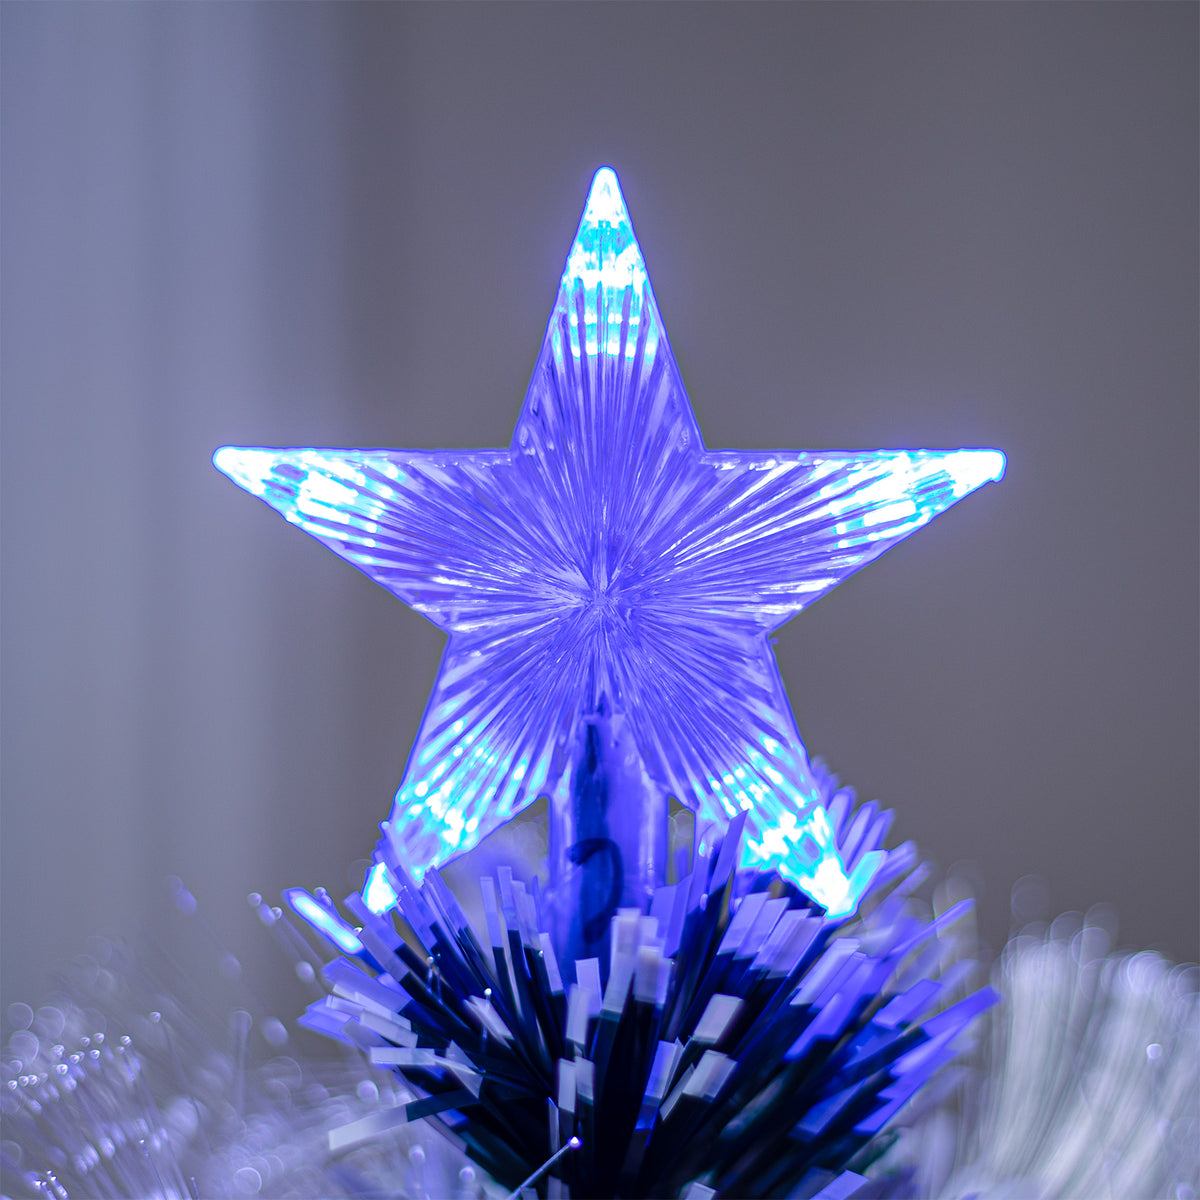 Green Christmas Tree 2ft to 6ft with Blue LED Lights and Stars and White Fibre Optics